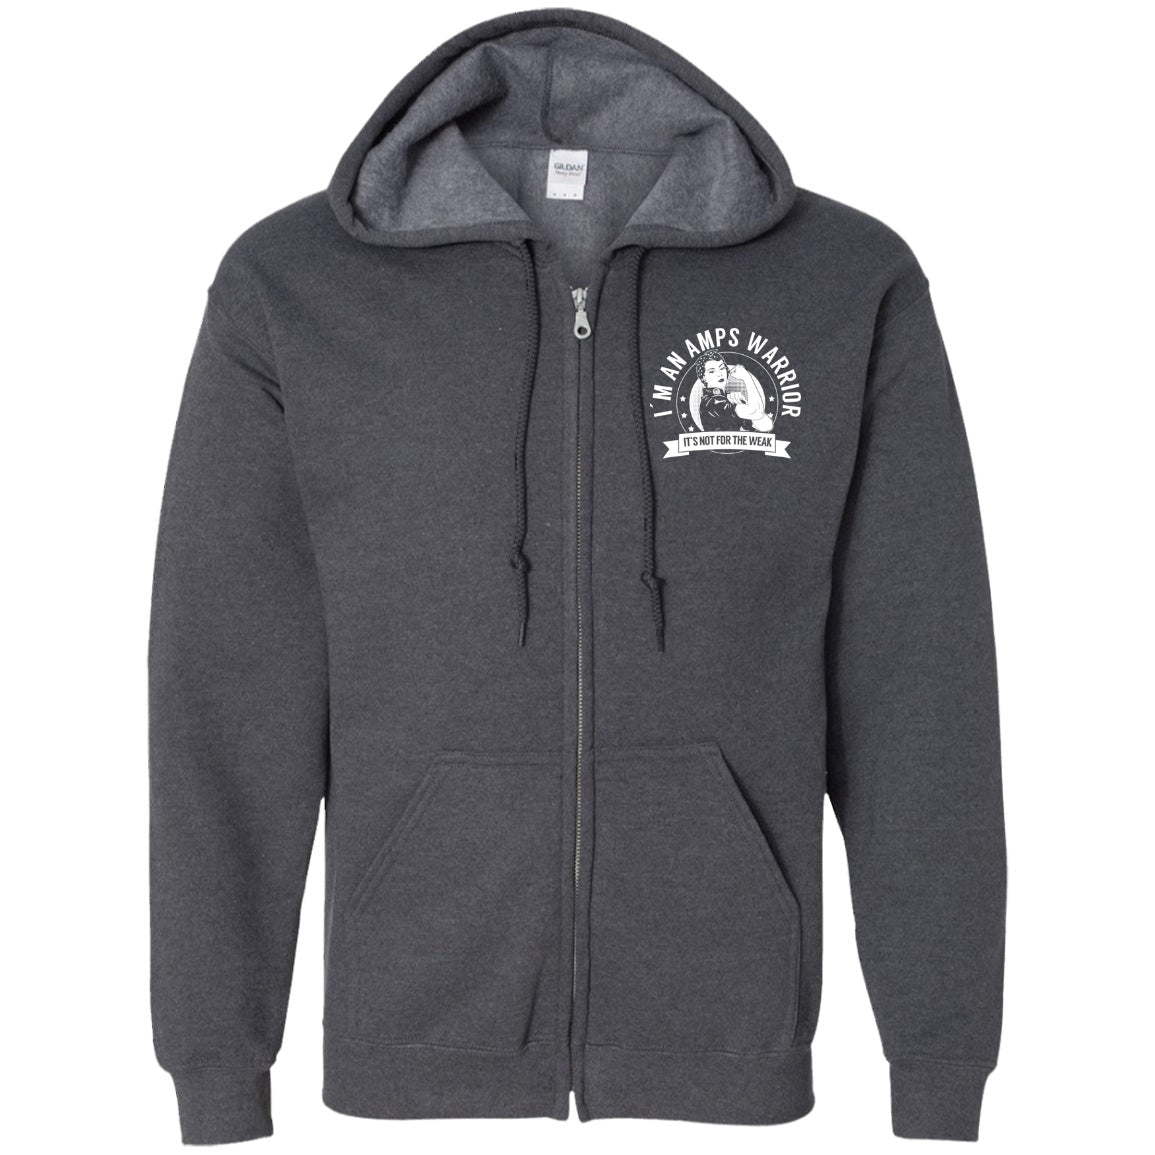 Amplified Musculoskeletal Pain Syndrome - AMPS Warrior NFTW Zip Up Hooded Sweatshirt - The Unchargeables